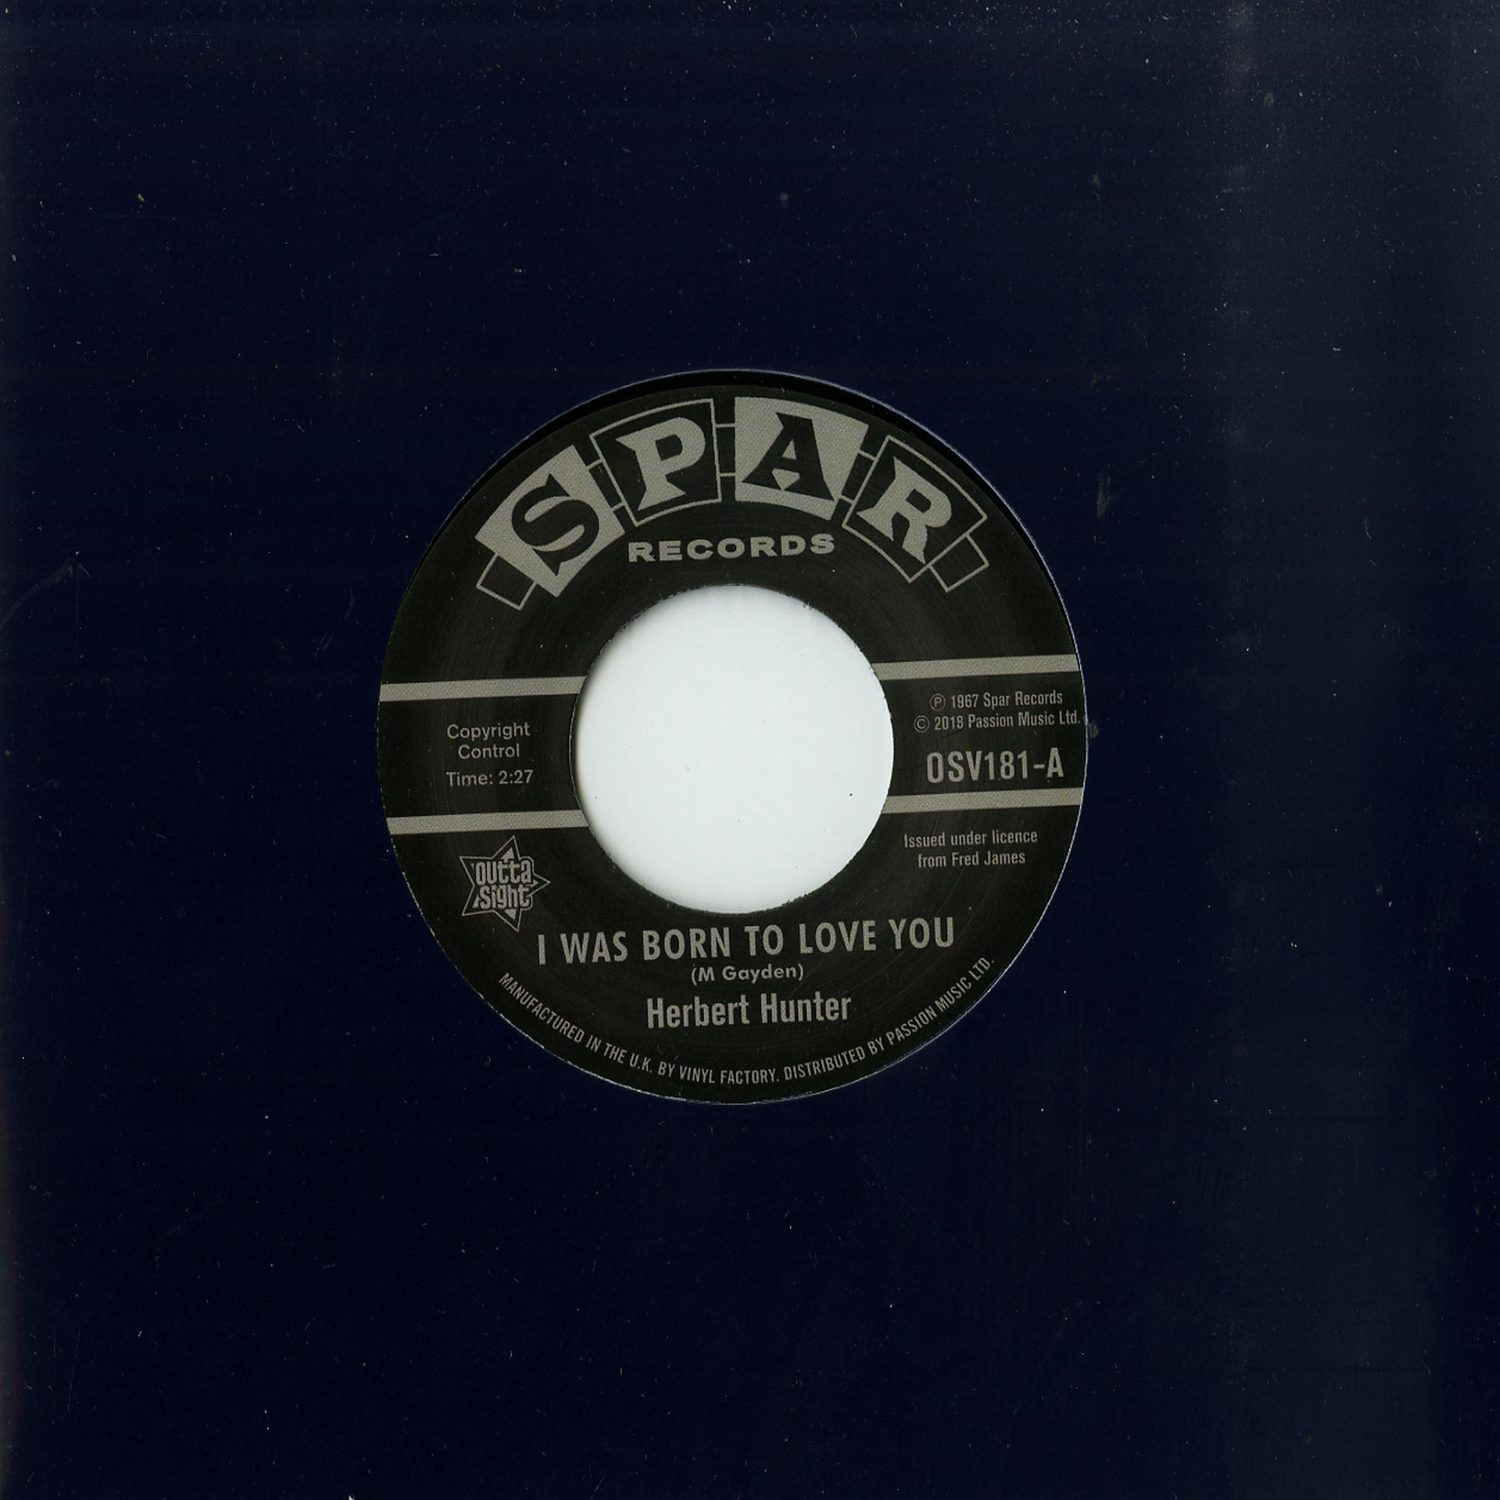 Herbert Hunter / The Jades - I WAS BORN TO LOVE YOU / I KNOW THAT FEELIN 